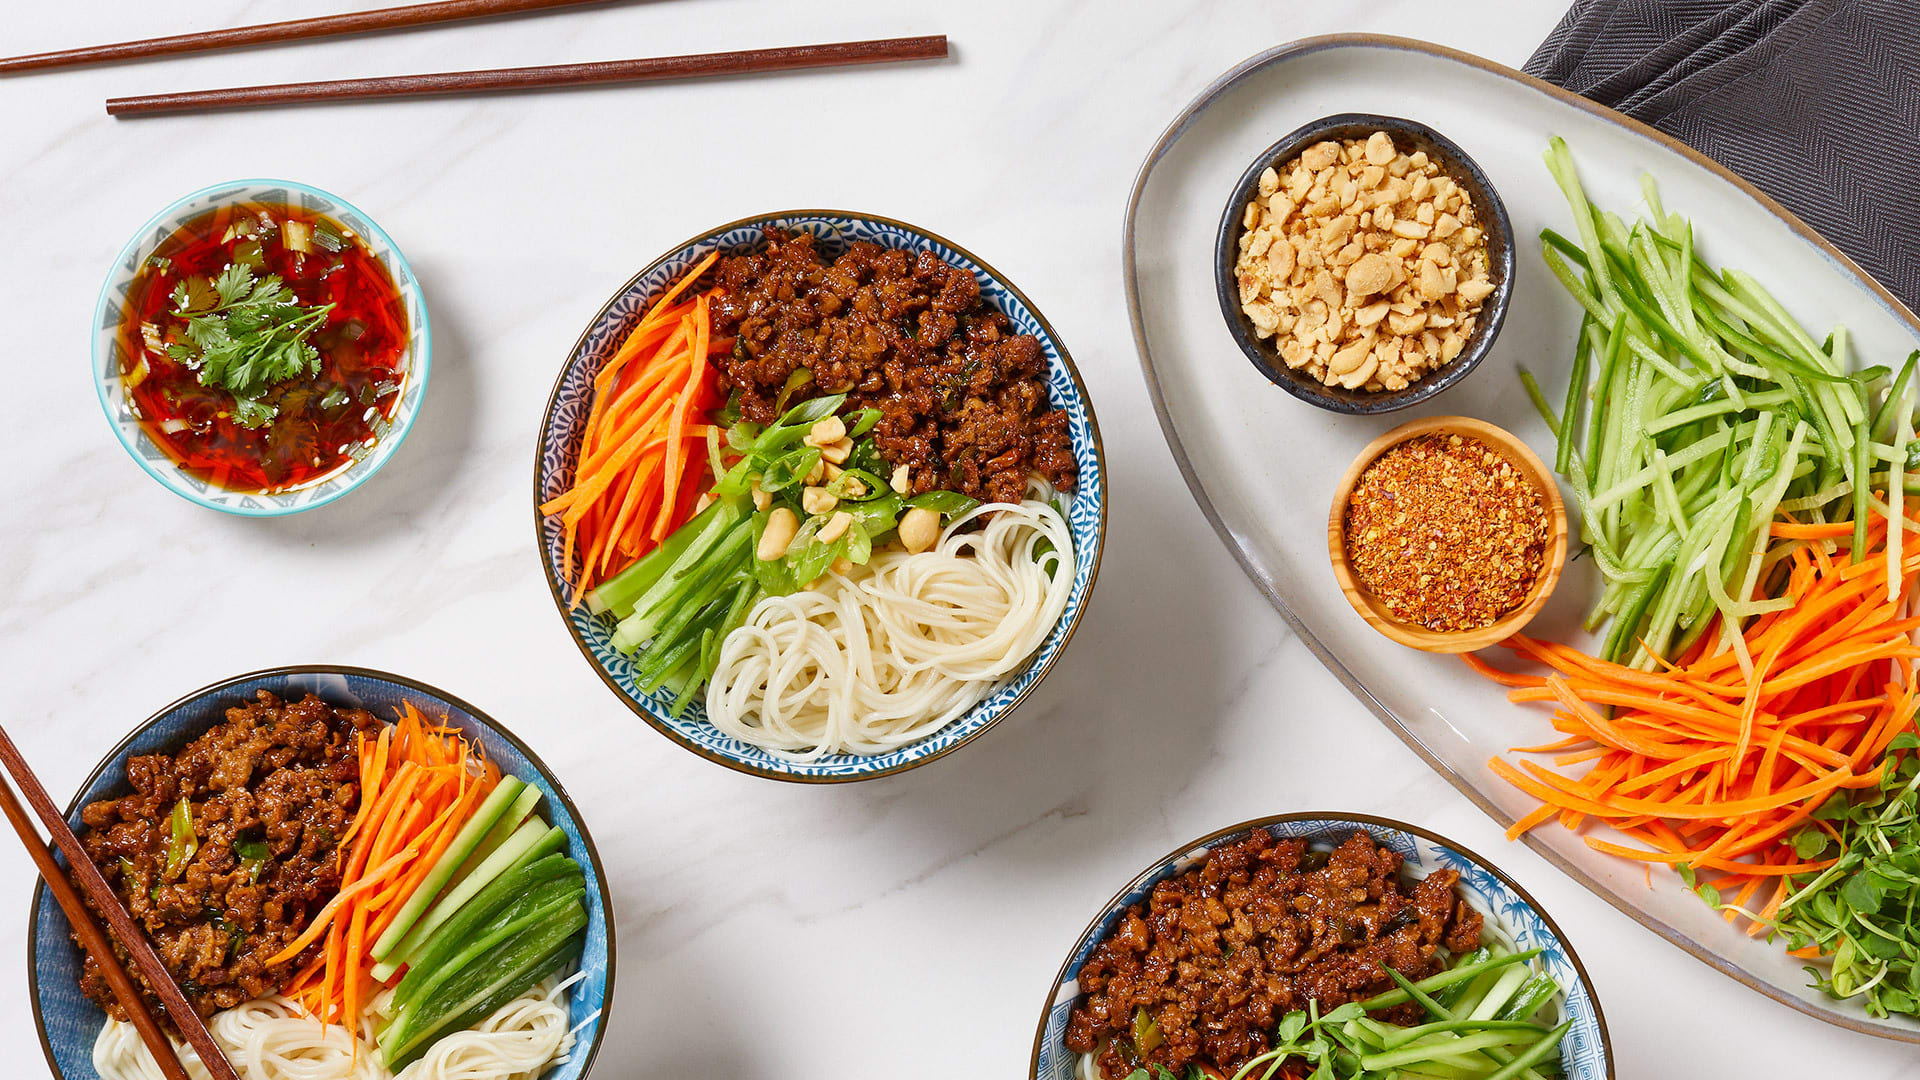 Bon appétit! Beyond Meat just introduced Beyond Pork as it expands to China